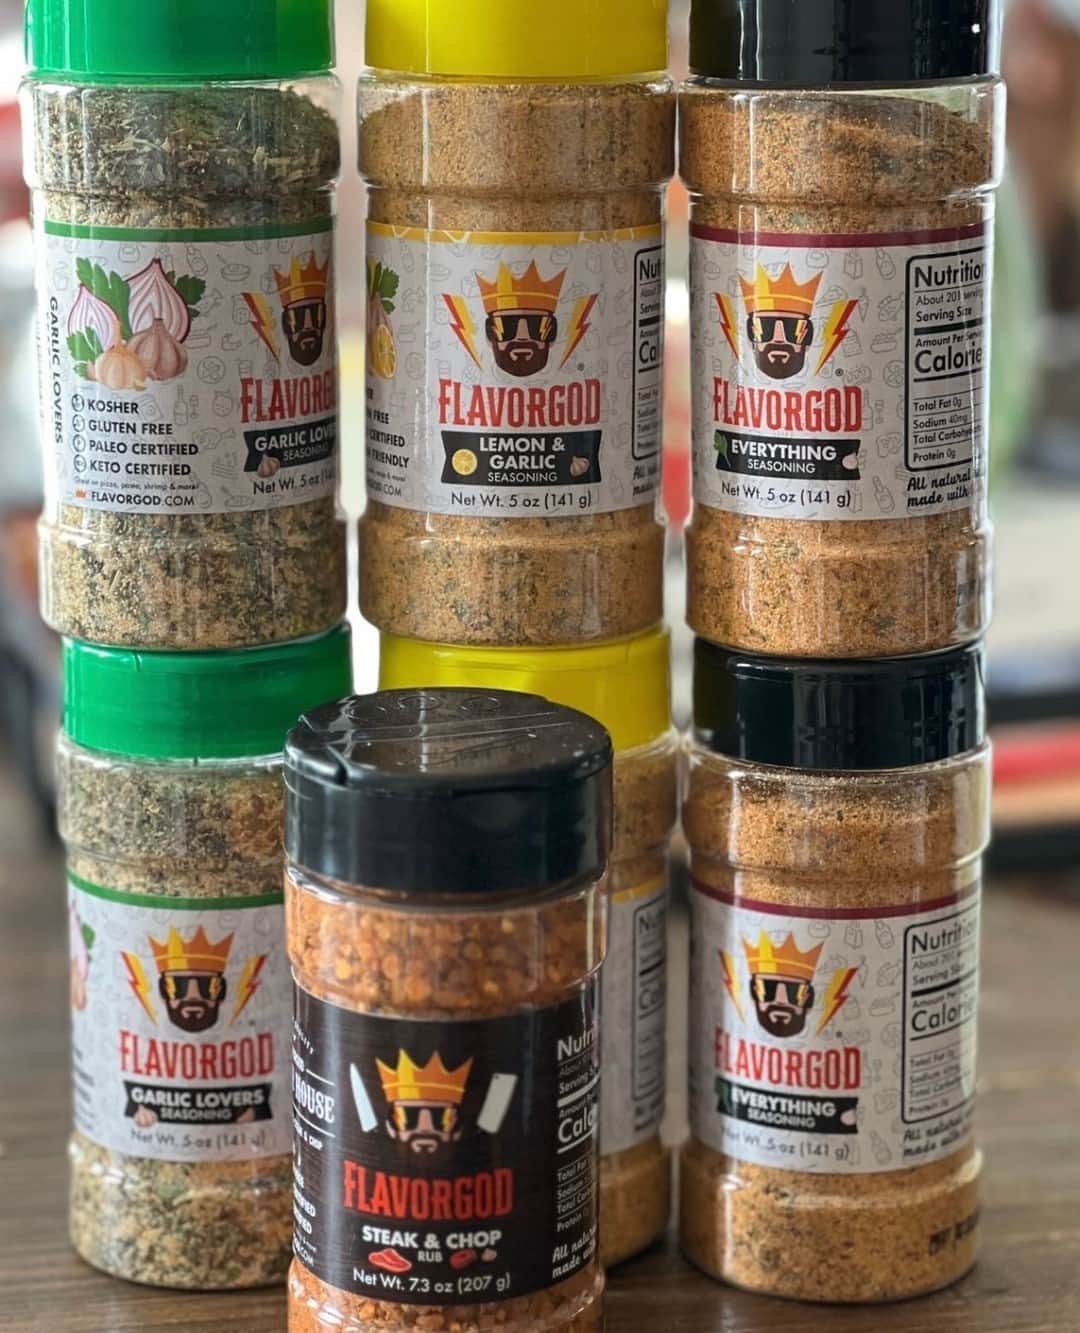 Flavorgod Seasoningsのインスタグラム：「#flavorgod Bottle Collection by customer @lissys.menu.magic! 😎⁠ -⁠ Add delicious flavors to any meal!⬇⁠ Click the link in my bio @flavorgod⁠ ✅www.flavorgod.com⁠ -⁠ Flavor God Seasonings are:⁠ ➡ZERO CALORIES PER SERVING⁠ ➡MADE FRESH⁠ ➡MADE LOCALLY IN US⁠ ➡FREE GIFTS AT CHECKOUT⁠ ➡GLUTEN FREE⁠ ➡#PALEO & #KETO FRIENDLY⁠ -⁠ #breakfast #fitness #food #foodporn #foodie #instafood #foodphotography #foodstagram #yummy #instagood  #foodies #tasty #cooking #instadaily #lunch #healthy #seasonings #flavorgod #lowsodium #glutenfree #dairyfree」